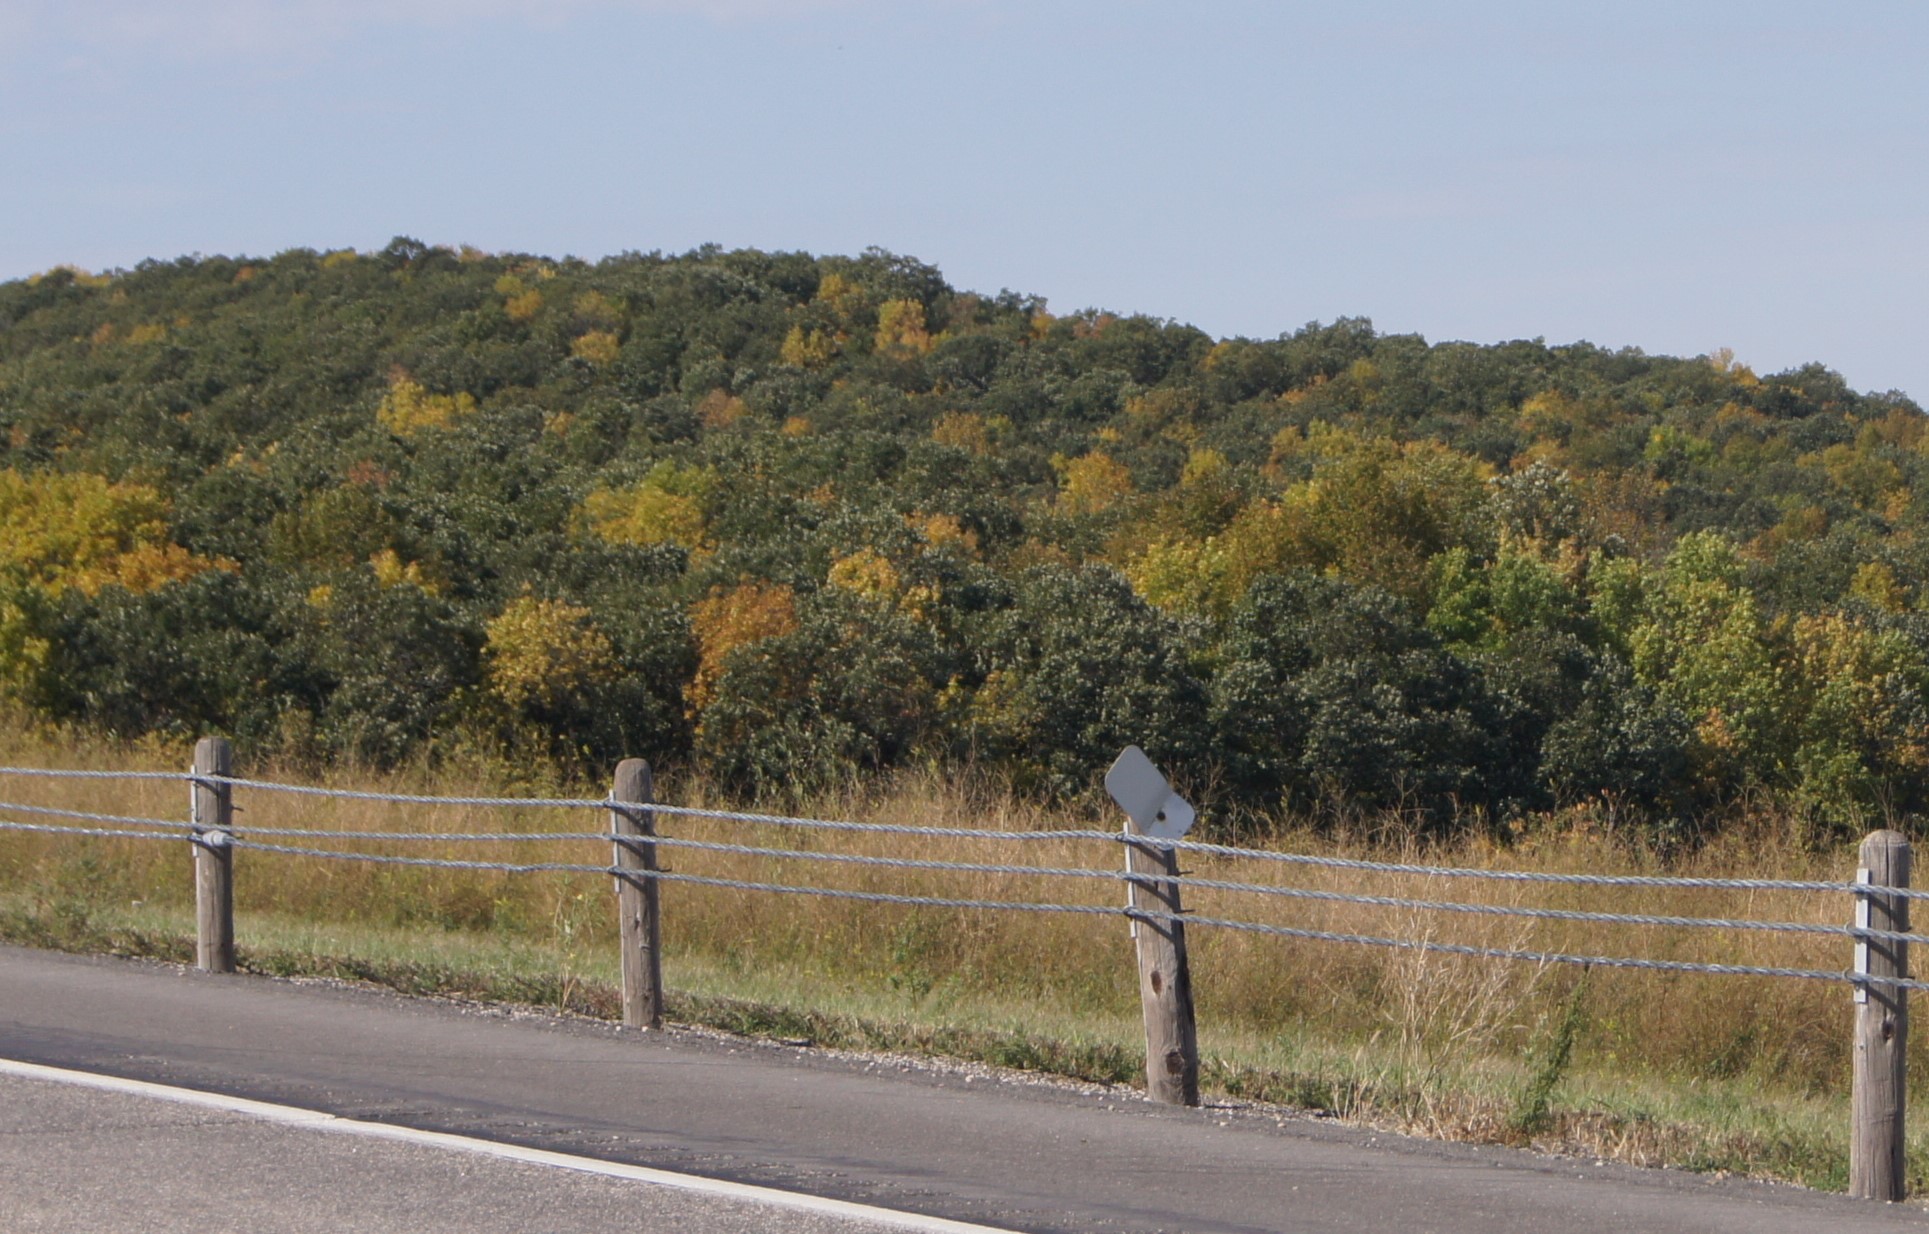 More than 50 townships in North Dakota have some sort of tree-based name. (NDSU photo)